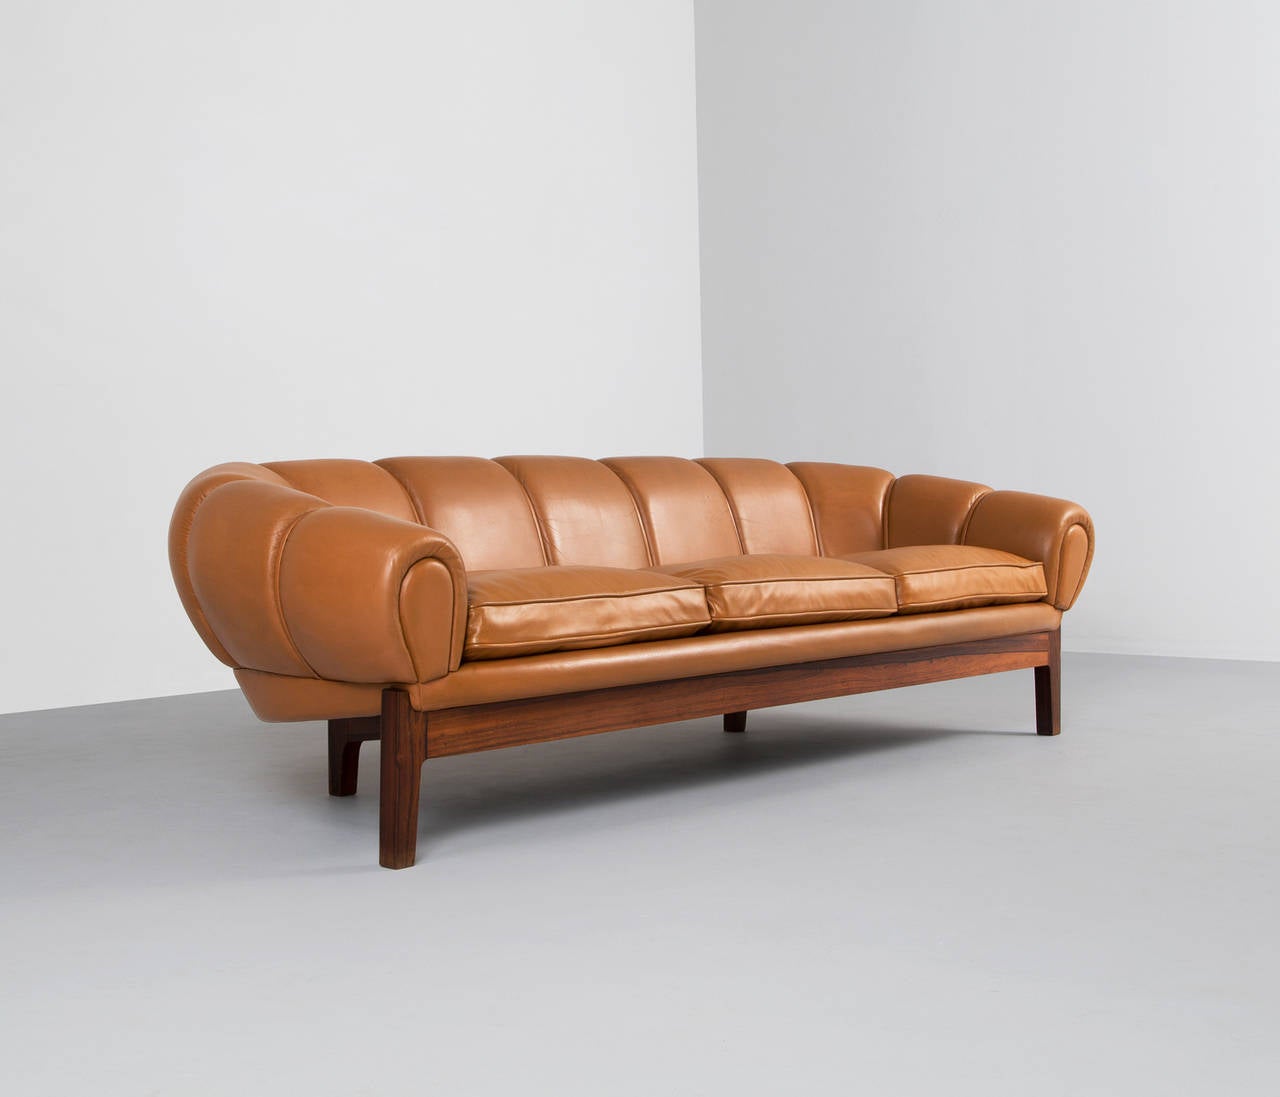 A highly unusual large sofa design attributed to Illum Wikkelsø, seating three persons. 

The sofa distinguishes itself by the round shapes, combined with the very low and flat profile, creating a very interesting expression. The use of the deep